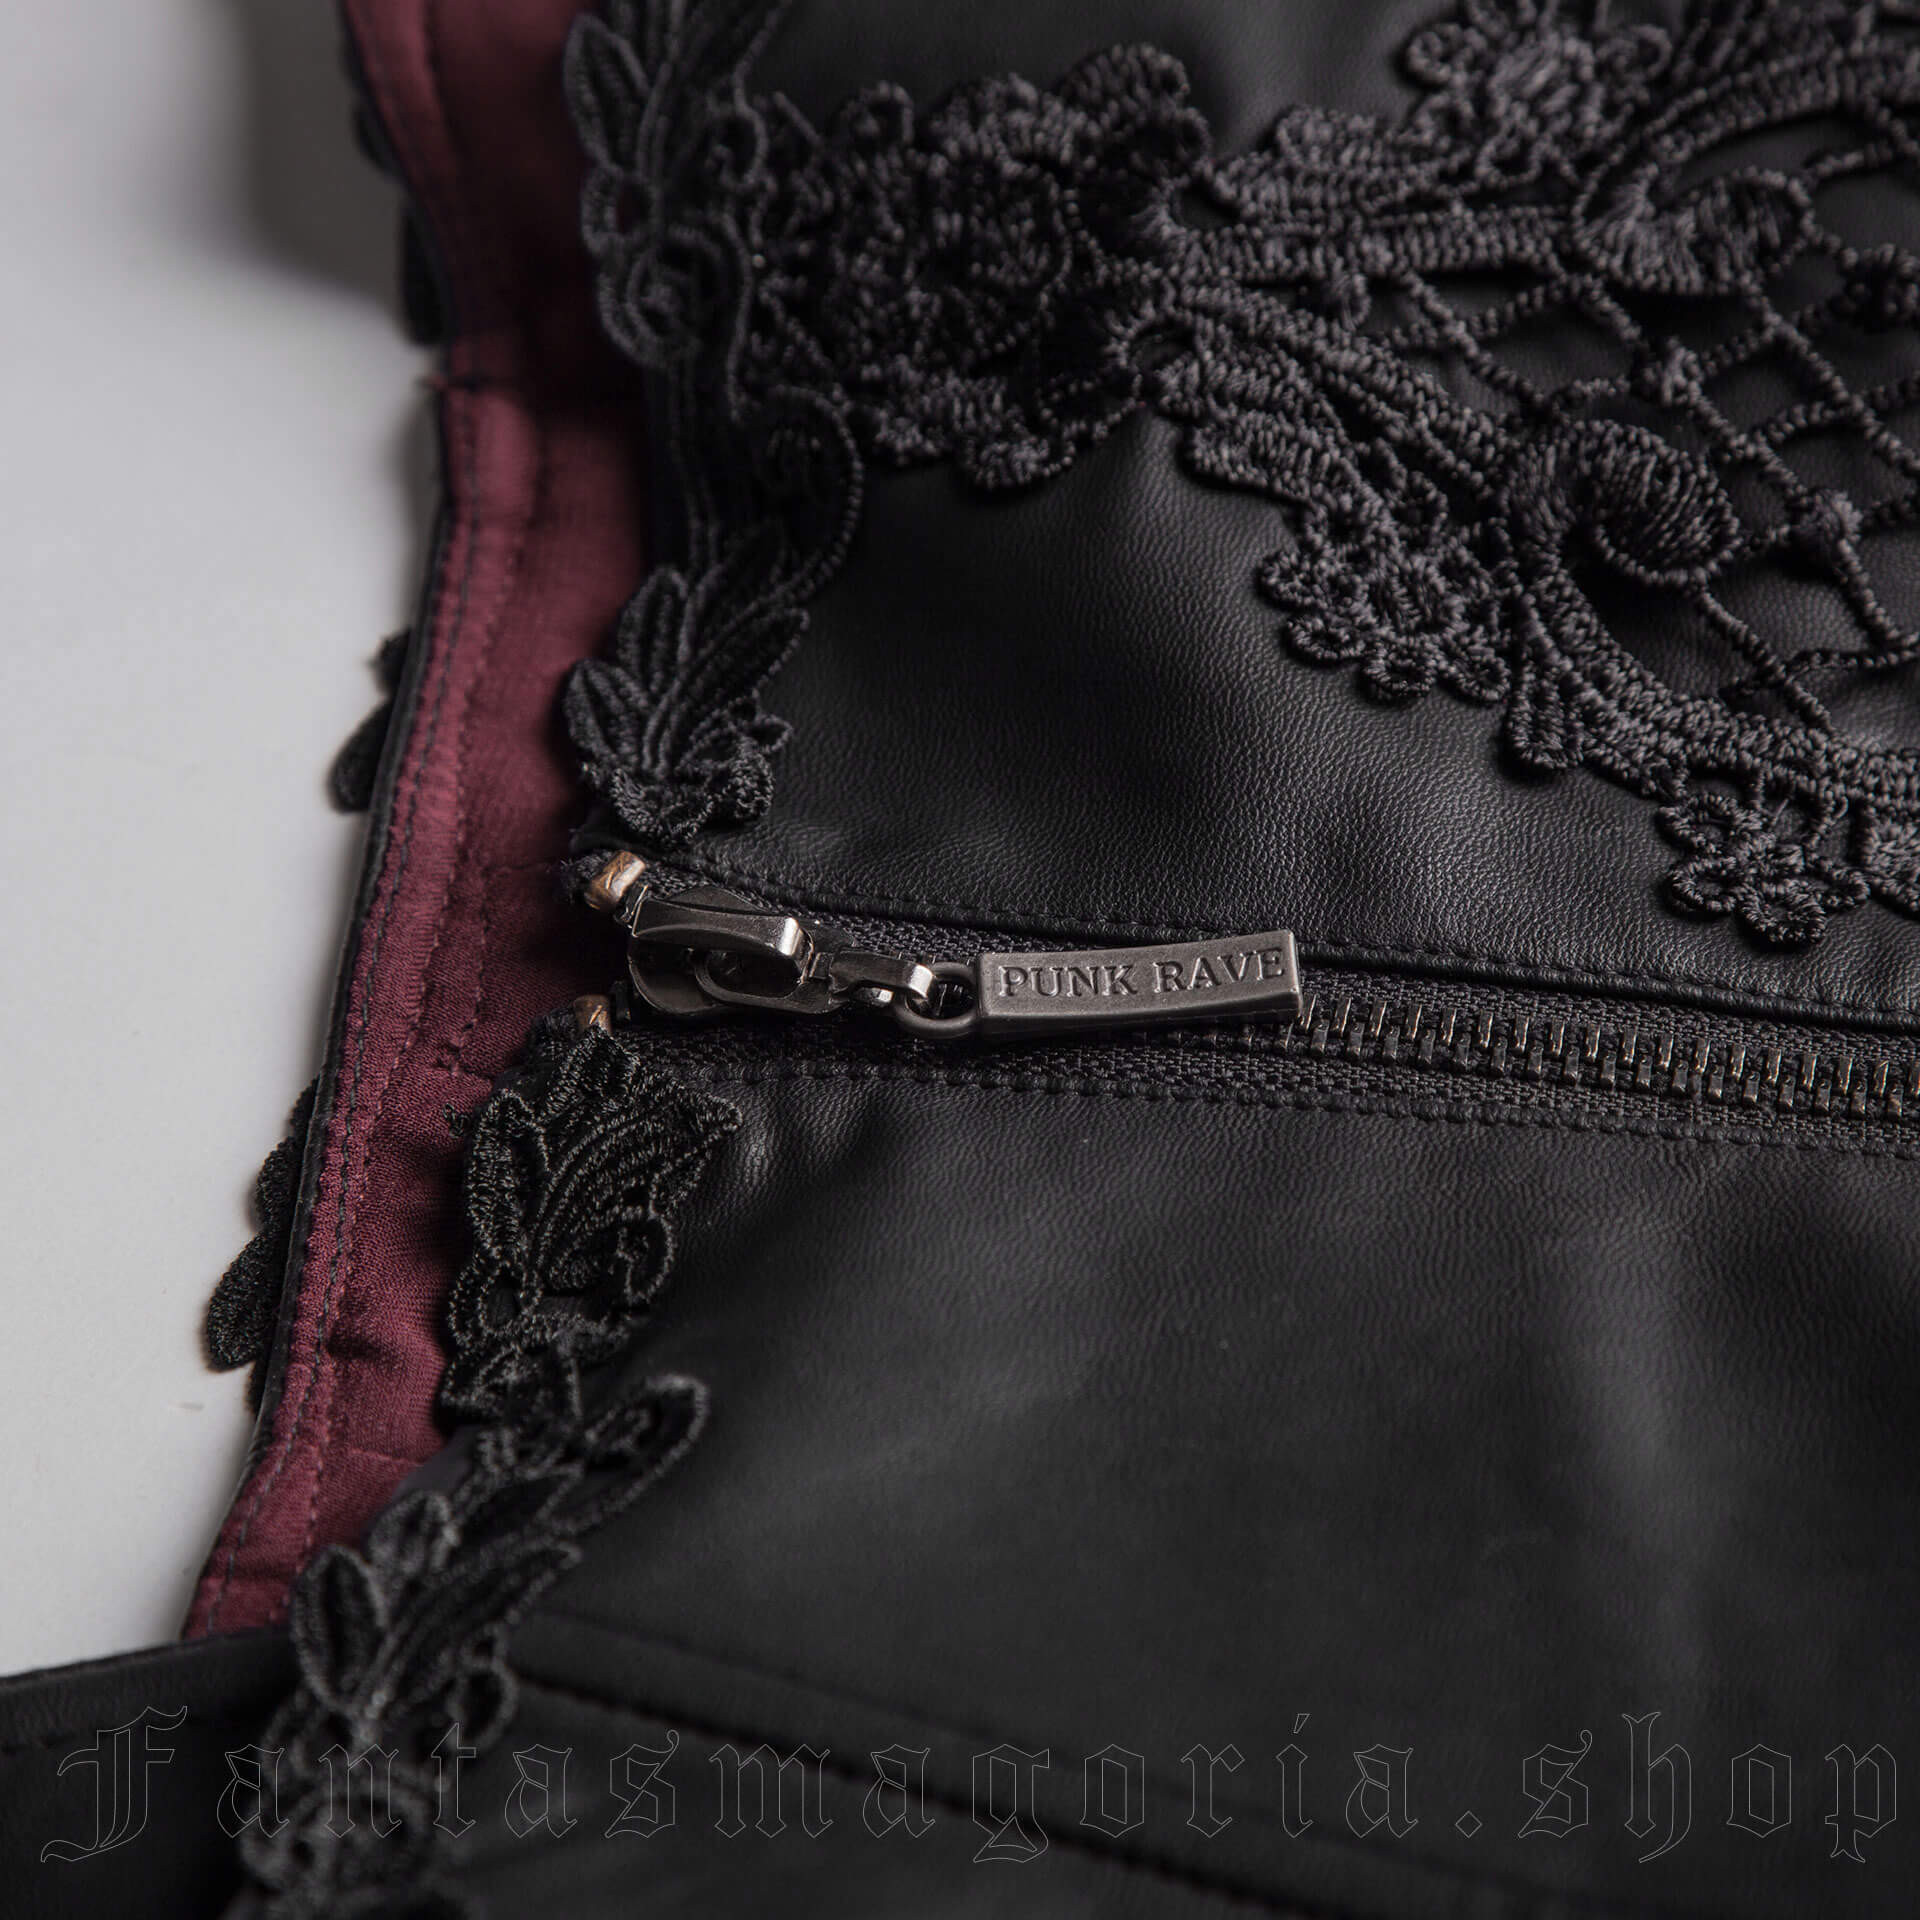 Tamara Black Lace and Mesh Corset-style Belt by Punk Rave - Gothic